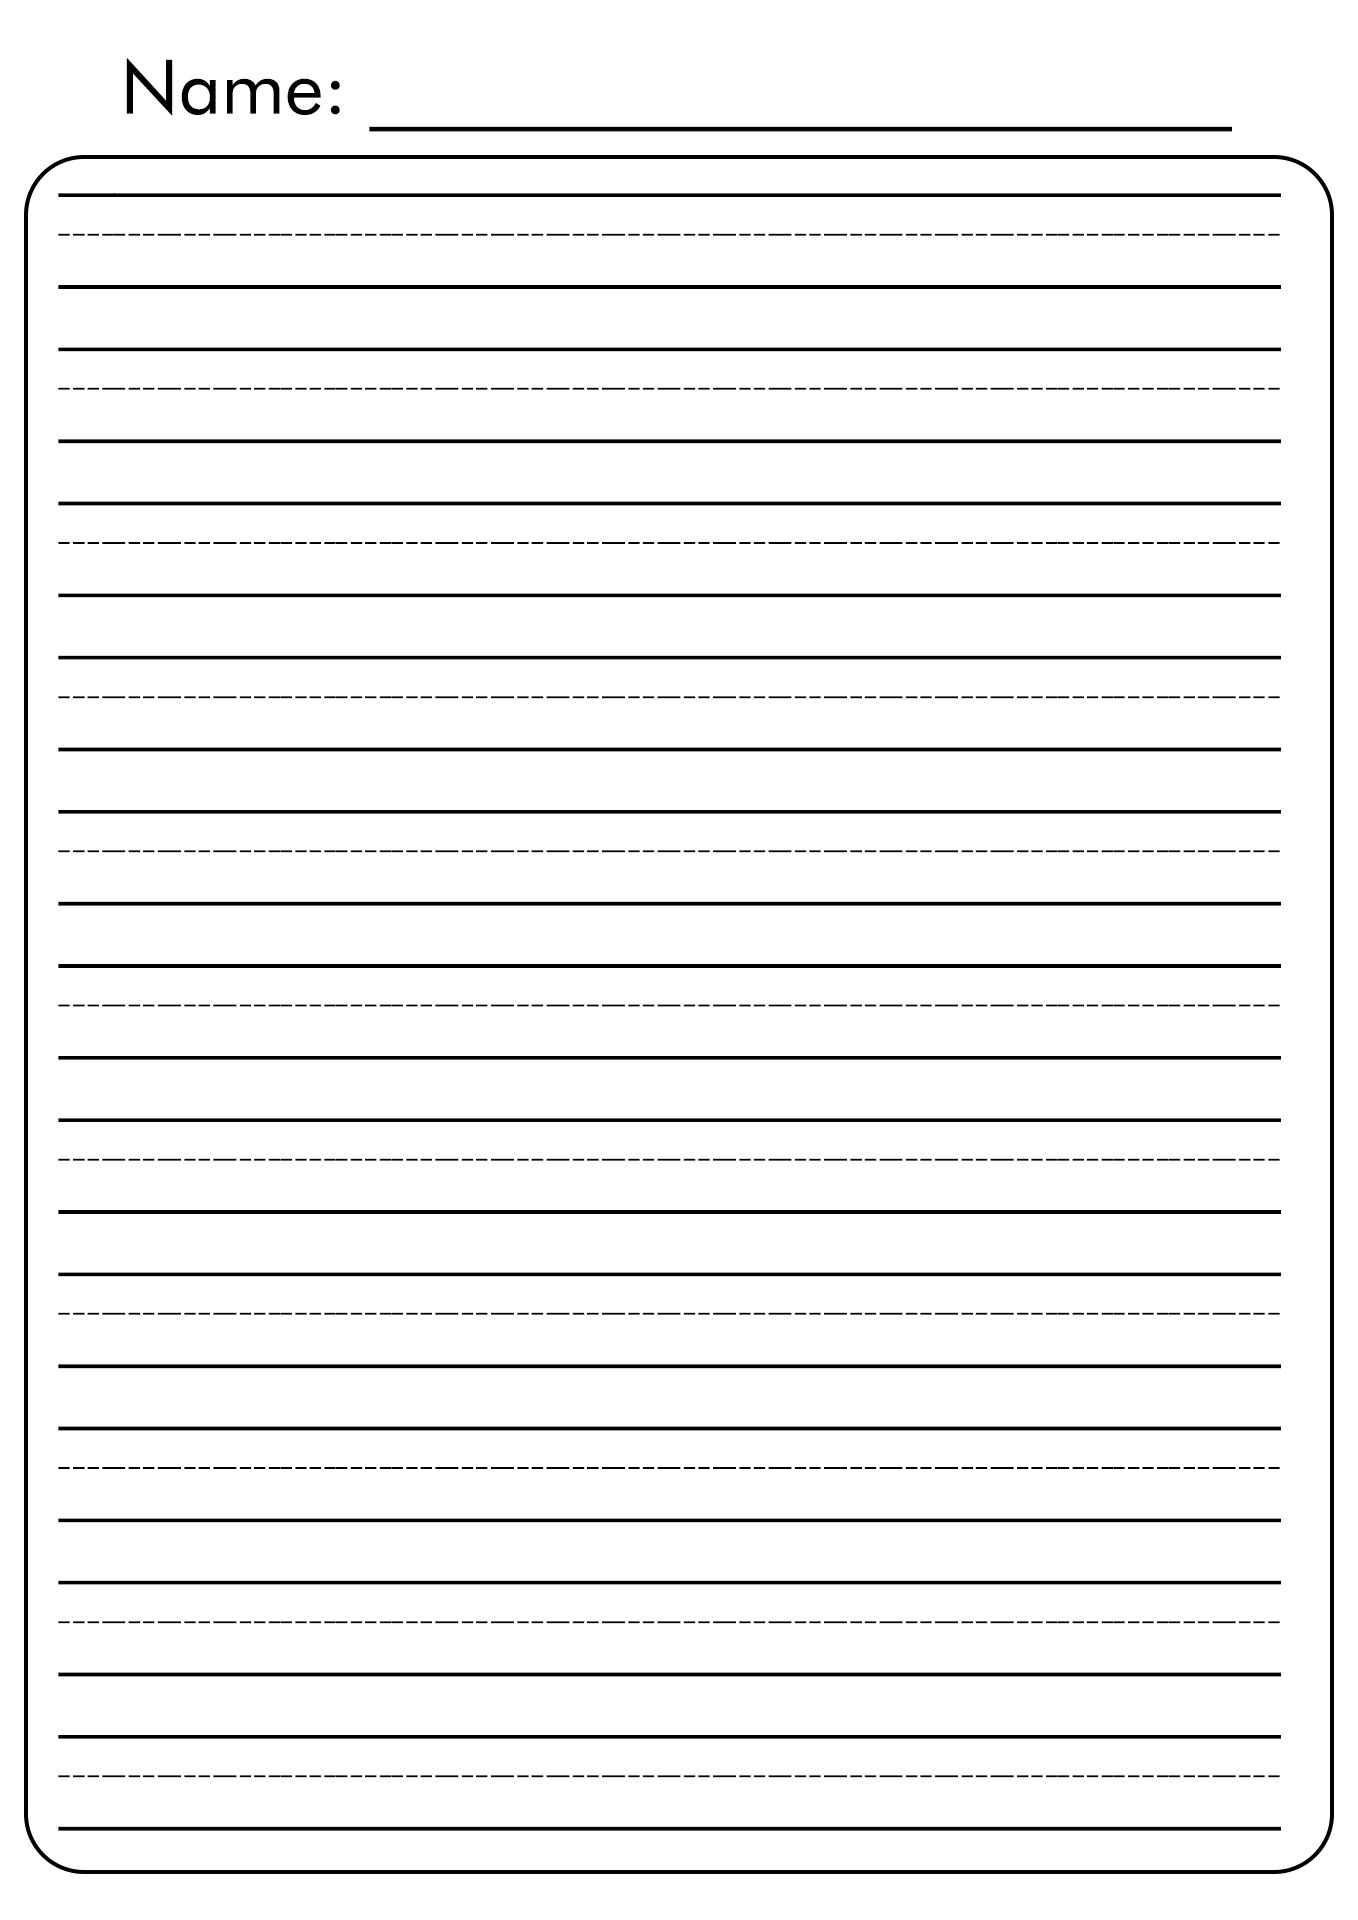 awesome-10-handwriting-worksheet-outline-images-small-letter-worksheet